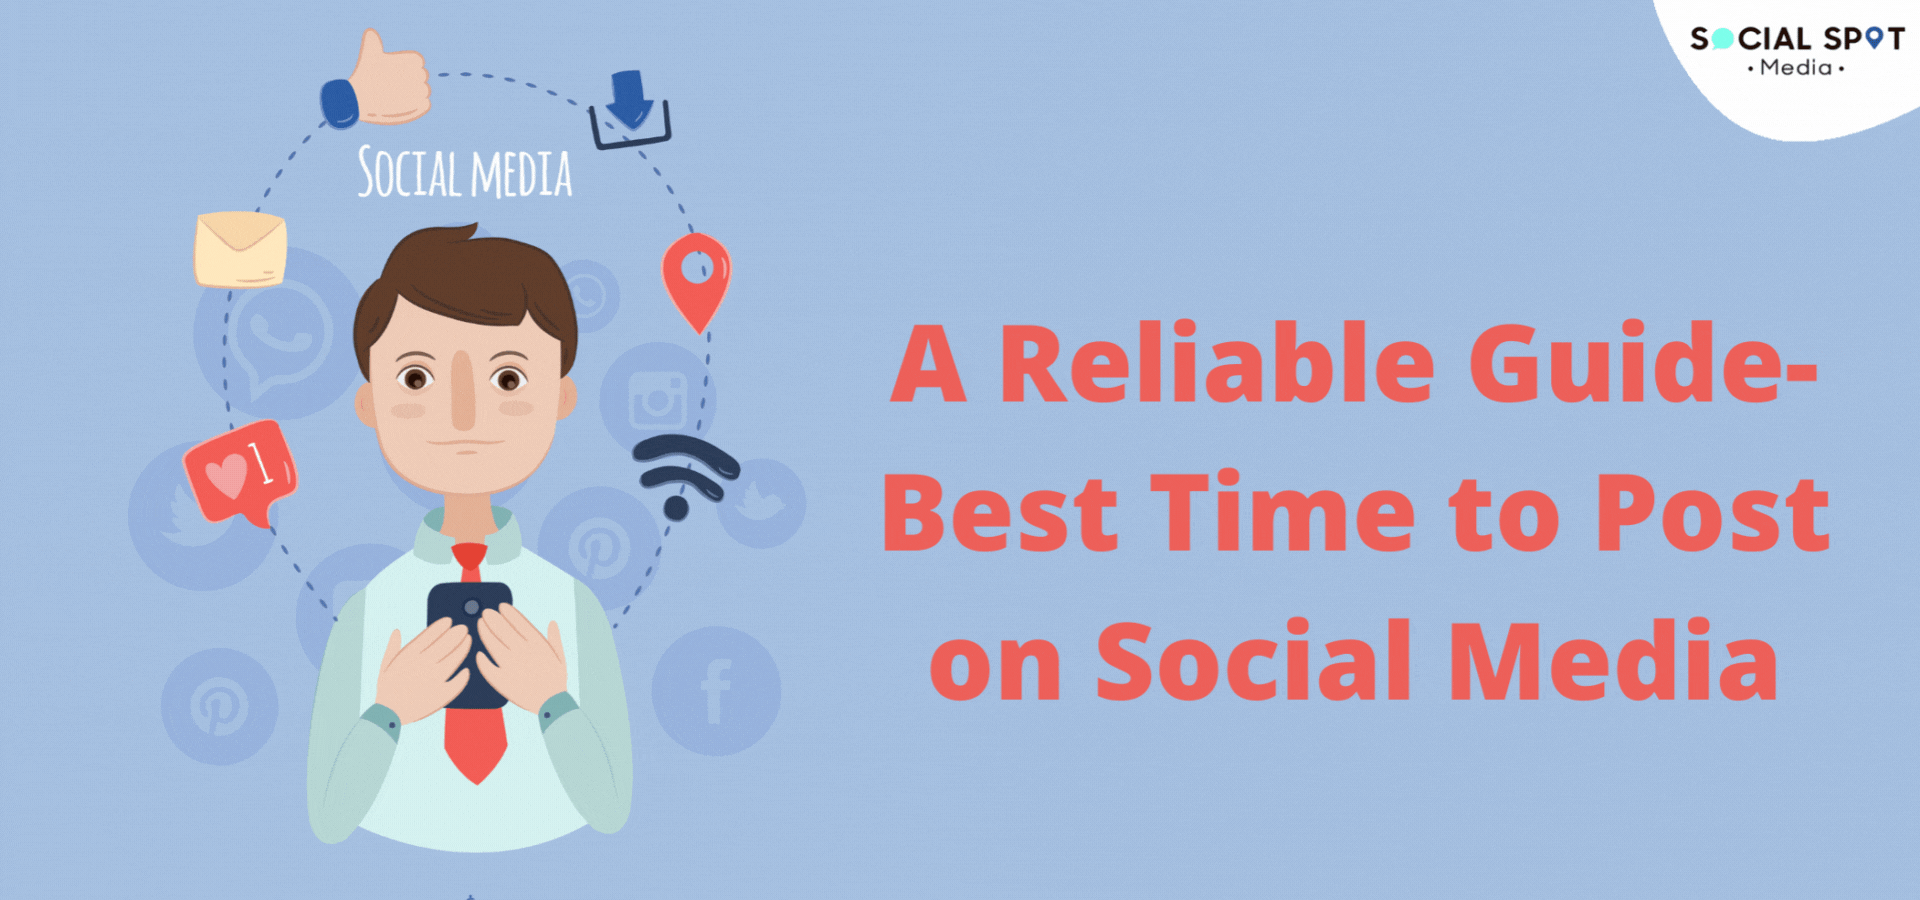 <strong>A Reliable Guide-  Best Time to Post on Social Media</strong>